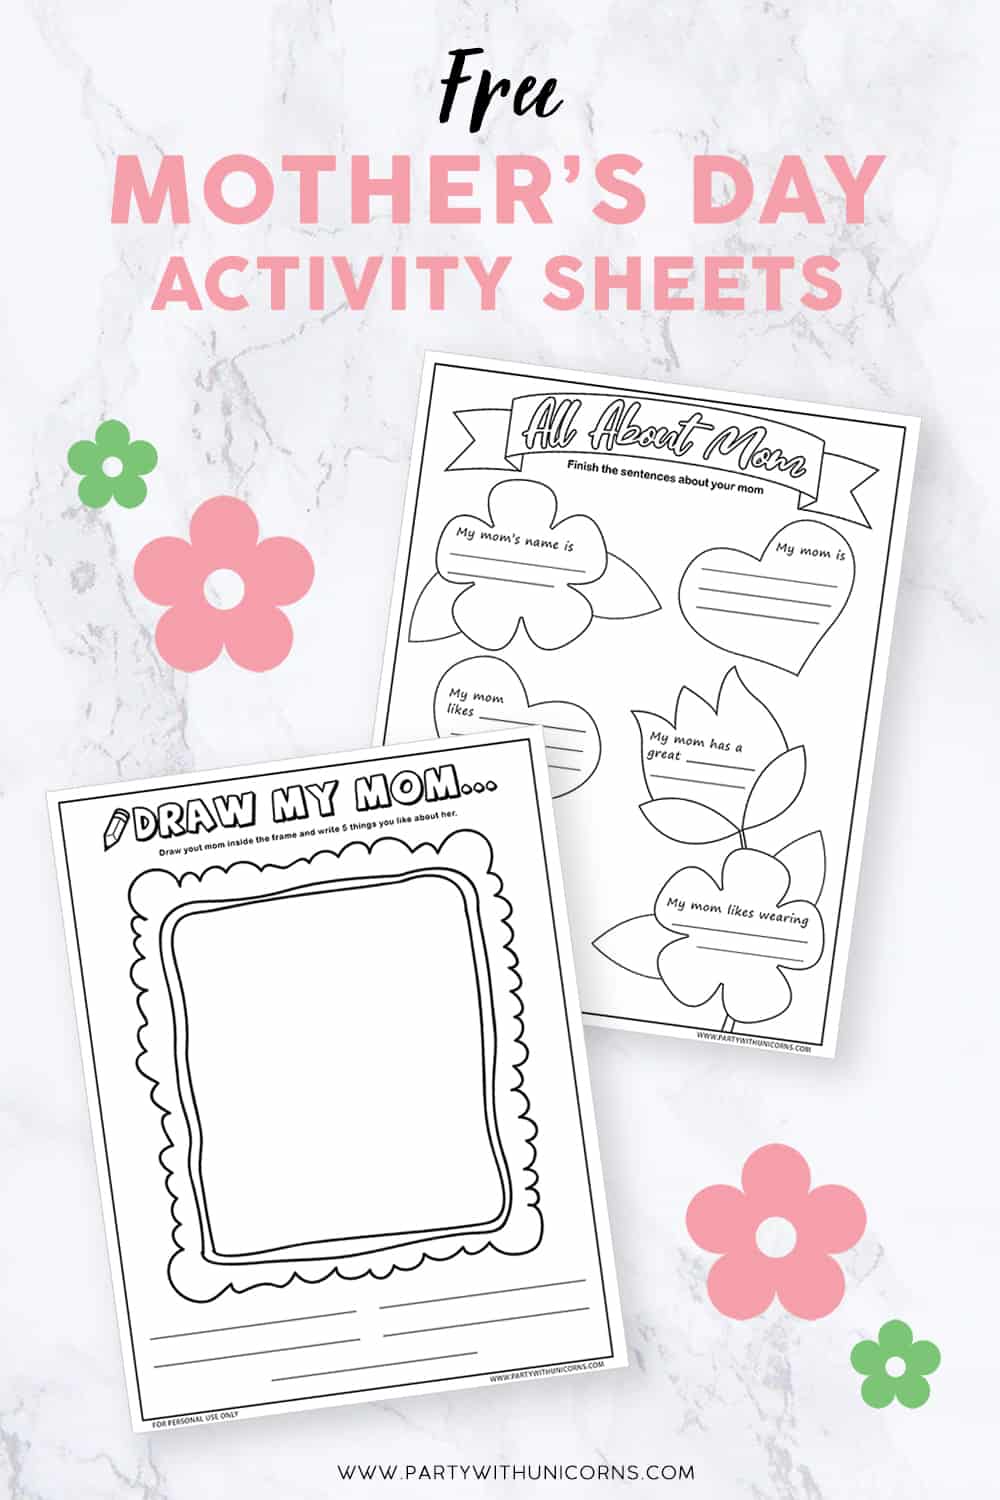 Free Mother's Day Activity Sheets image